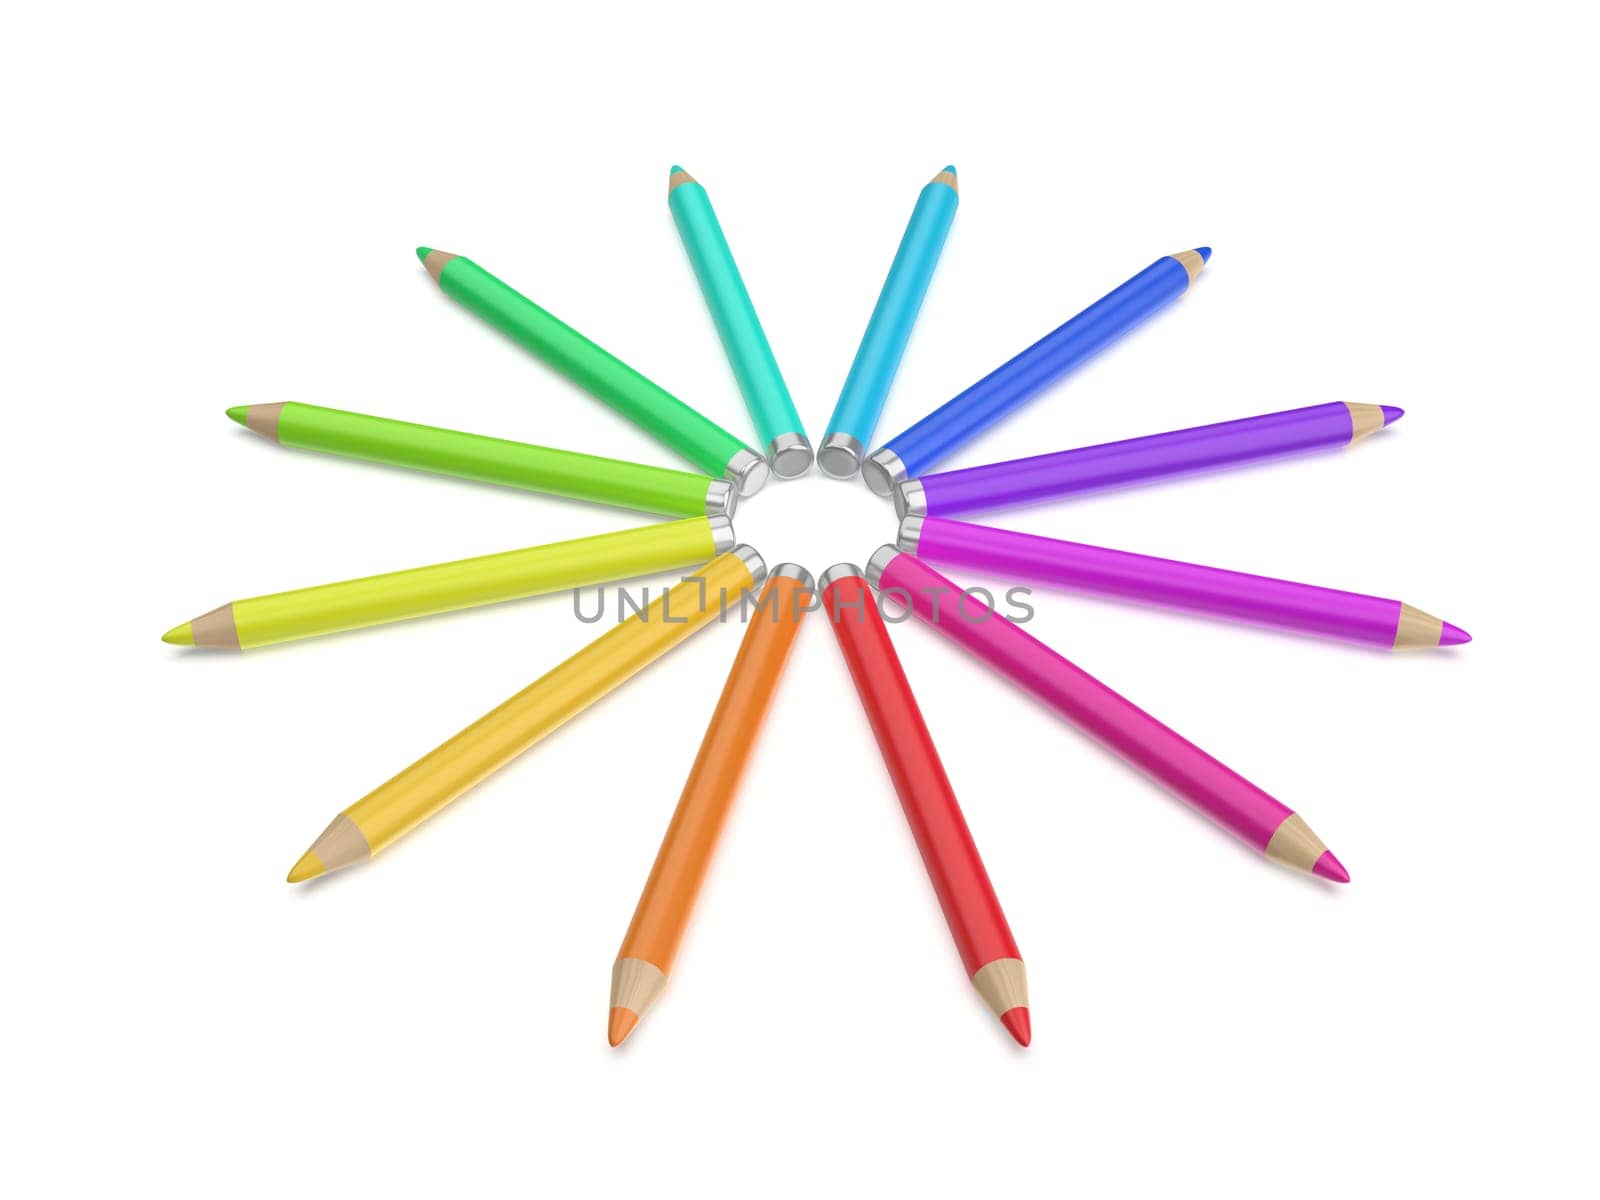 Colorful eye pencils on white background